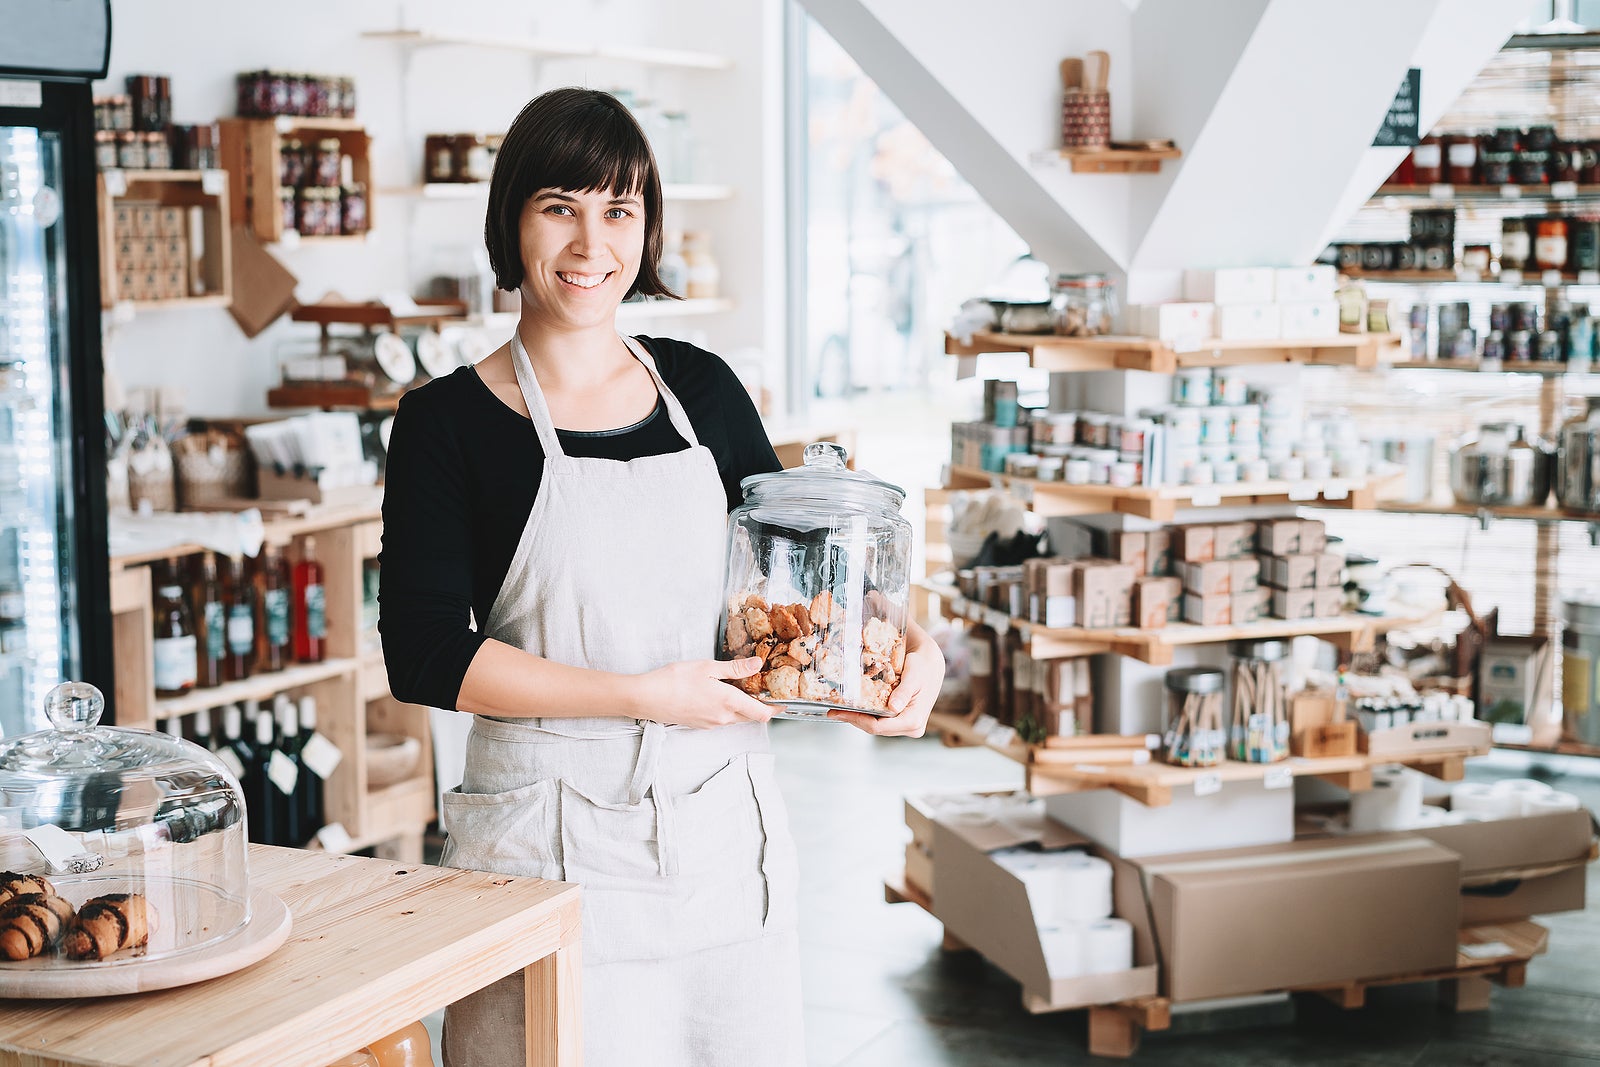 Small local business owner. Seller assistant with glass jar of pastries in interior of zero waste shop. Cheerful woman in apron stands behind counter with food products in plastic free grocery store.